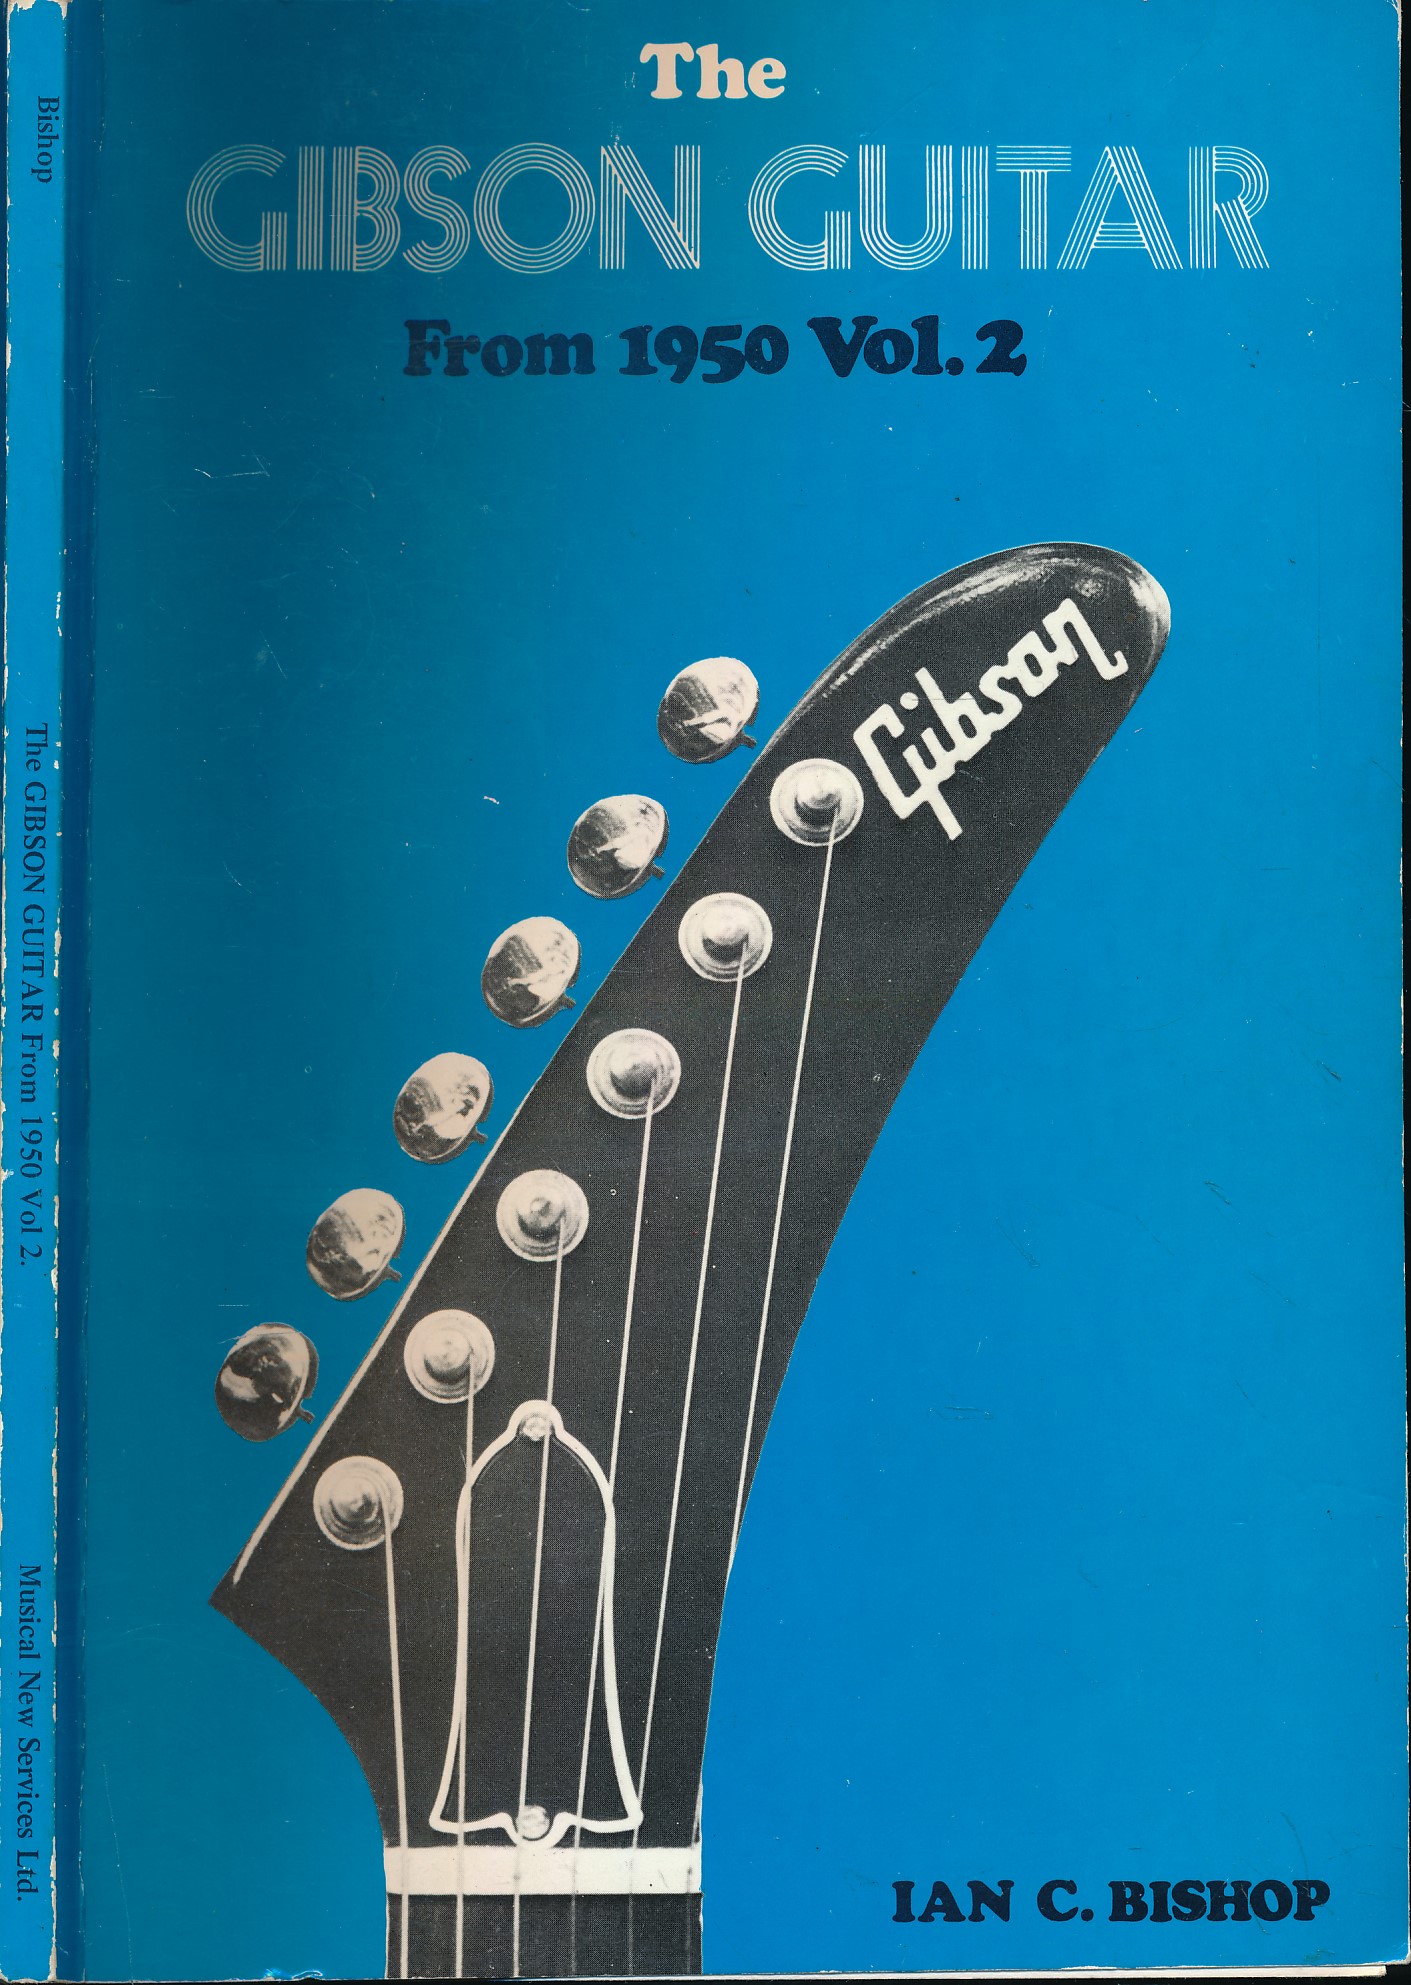 The Gibson Guitar from 1950. Vol 2